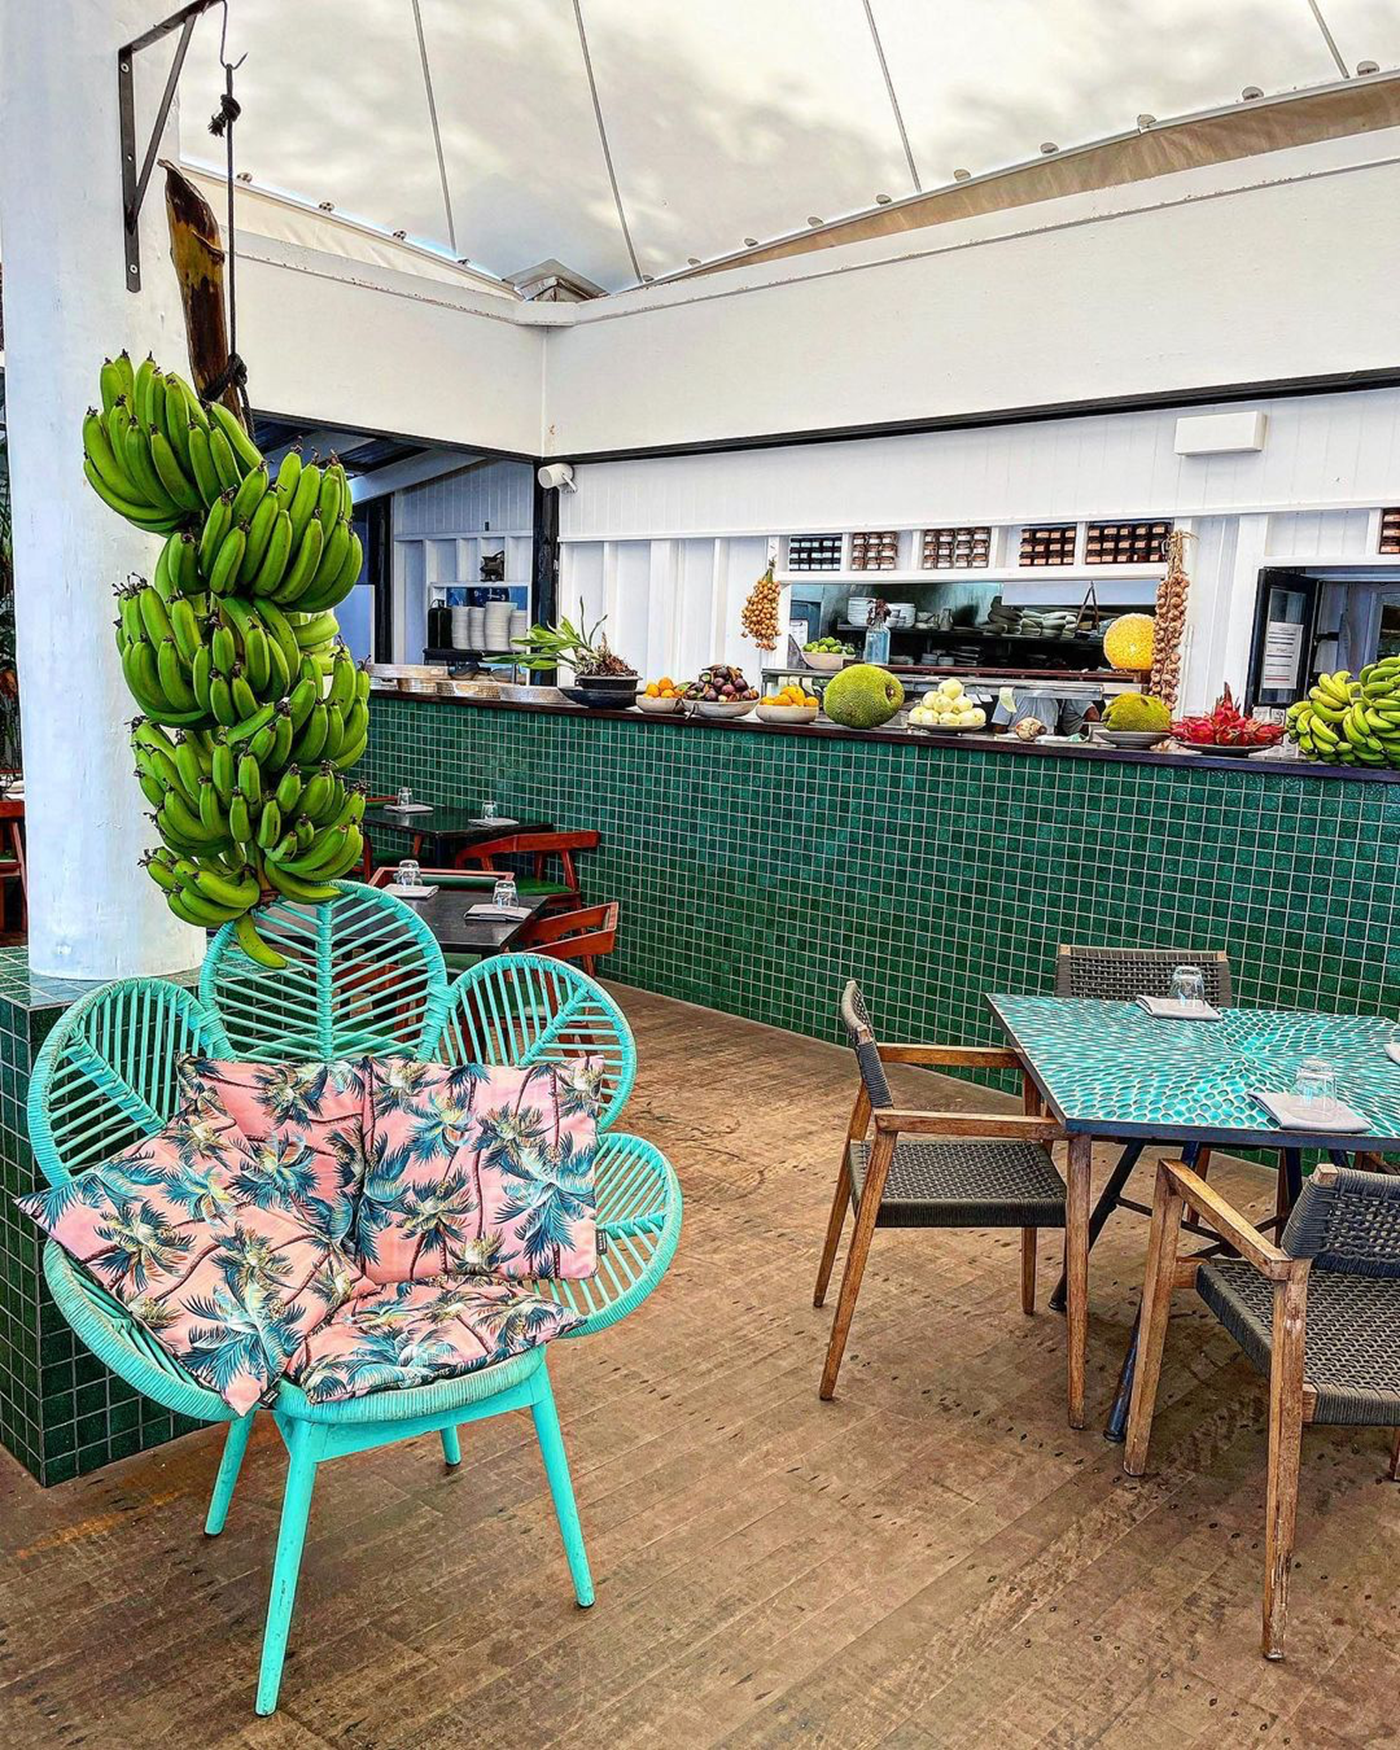 A green tiled bar stacked with fruit, and dining tables in the foreground